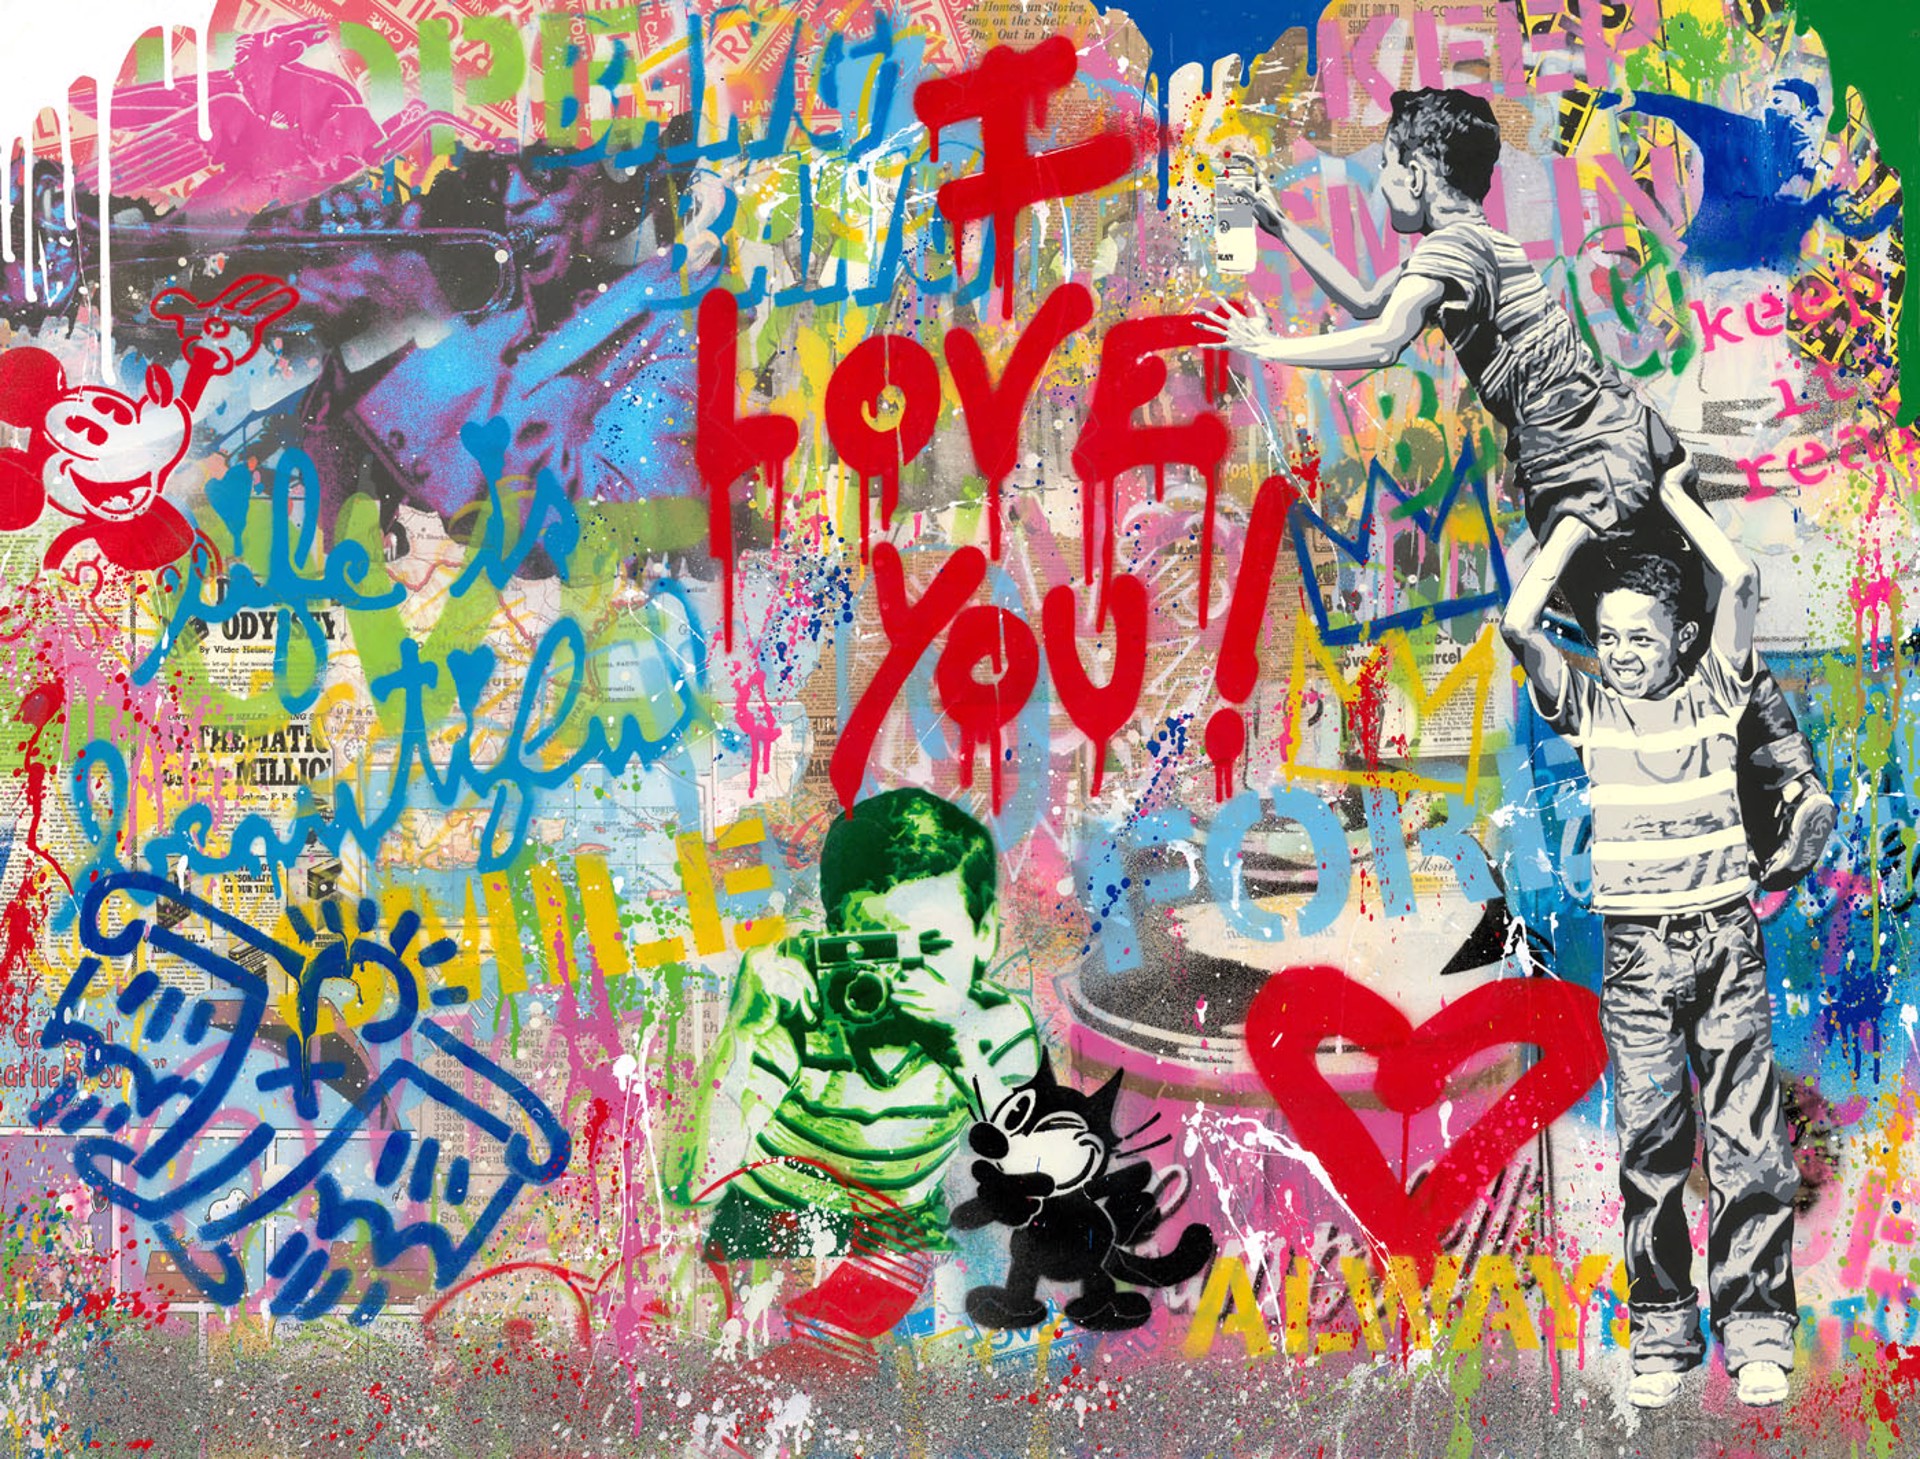 Never, Never give up! by Mr Brainwash